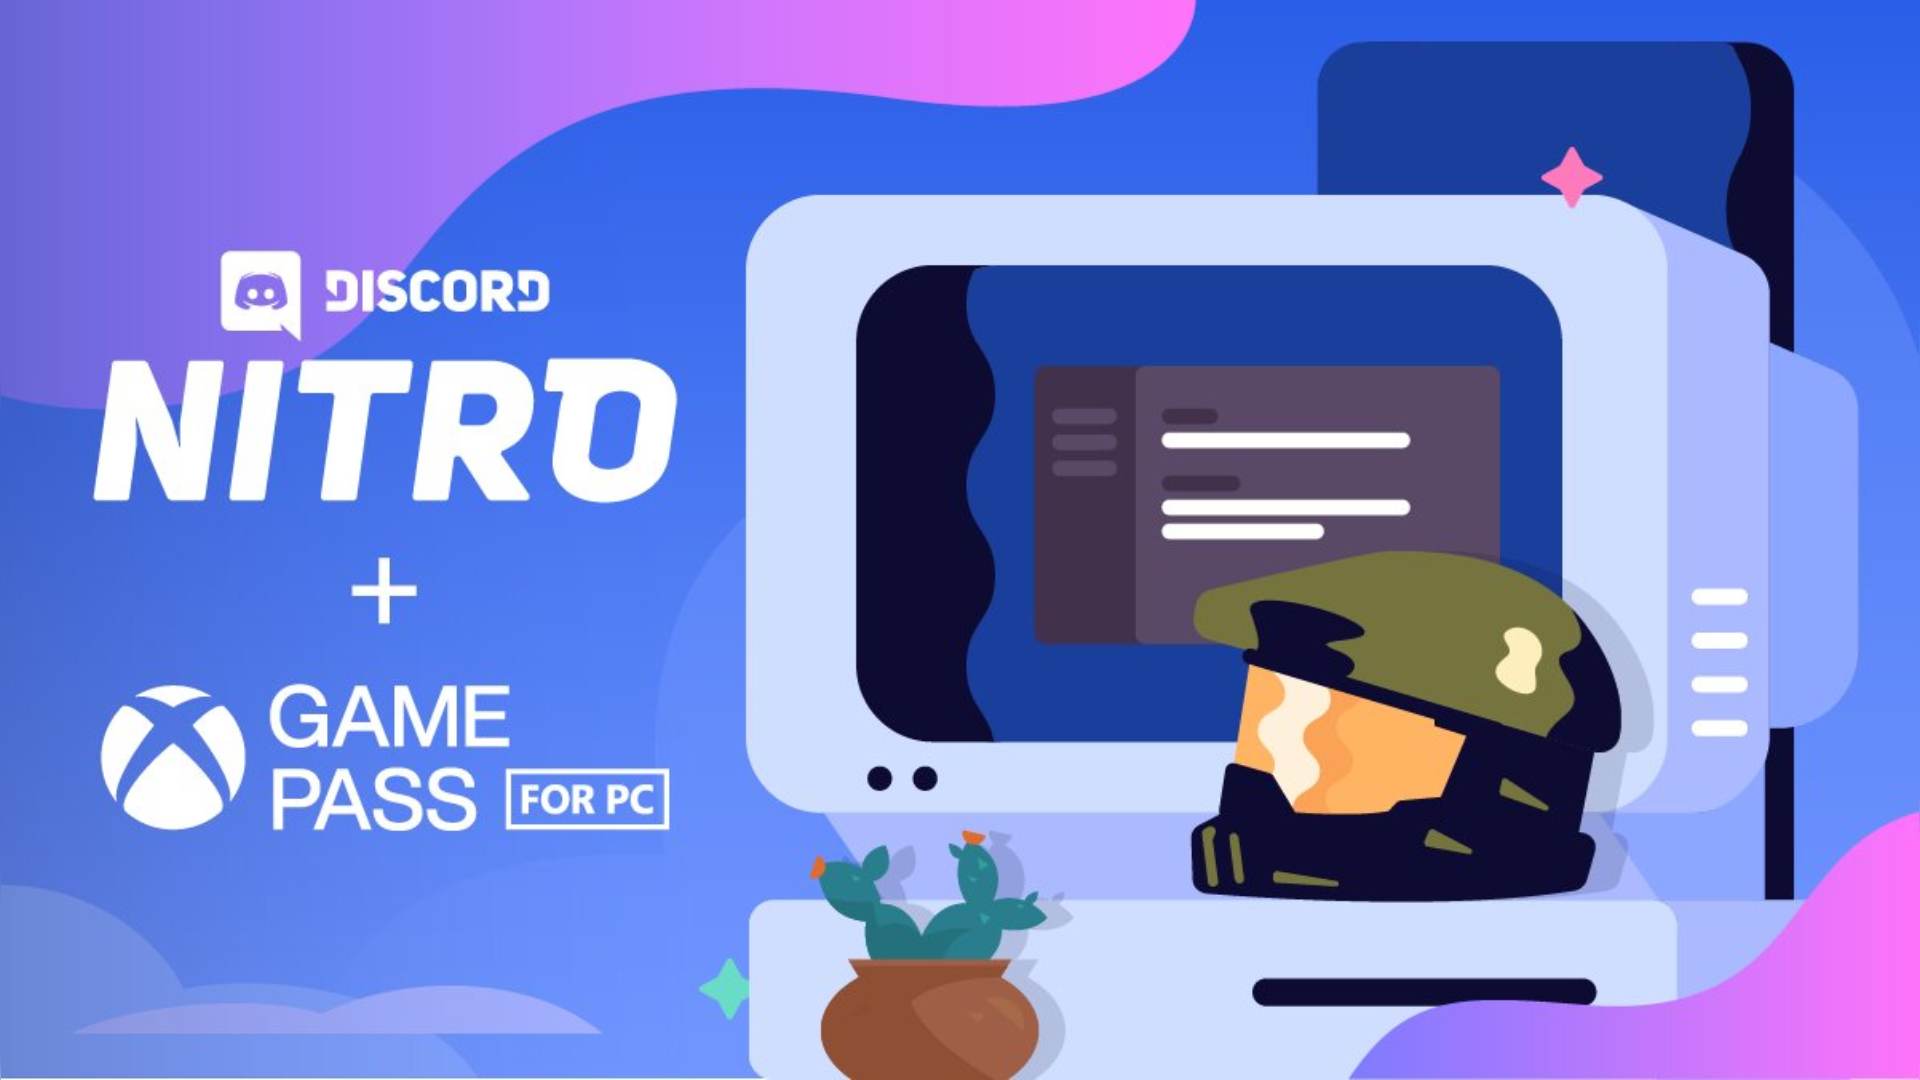 how to redeem 3 month xbox game pass discord nitro